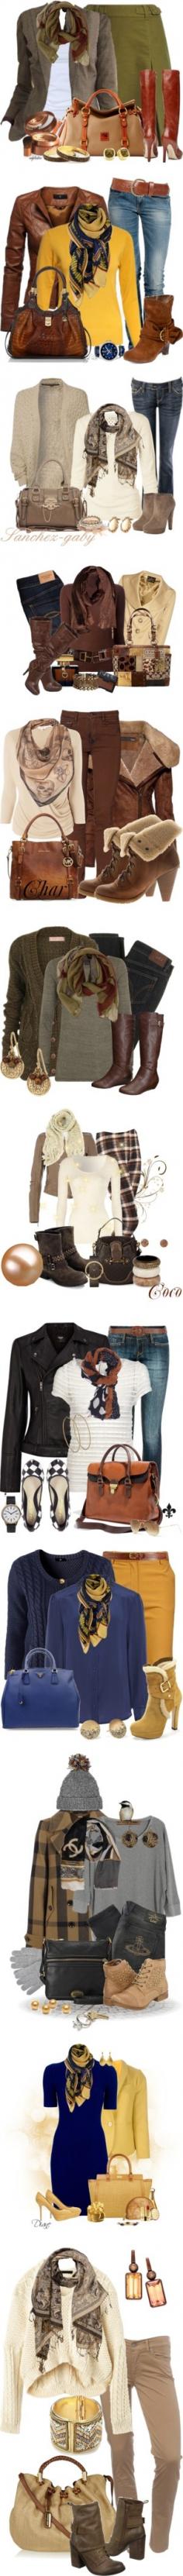 Fall outfits